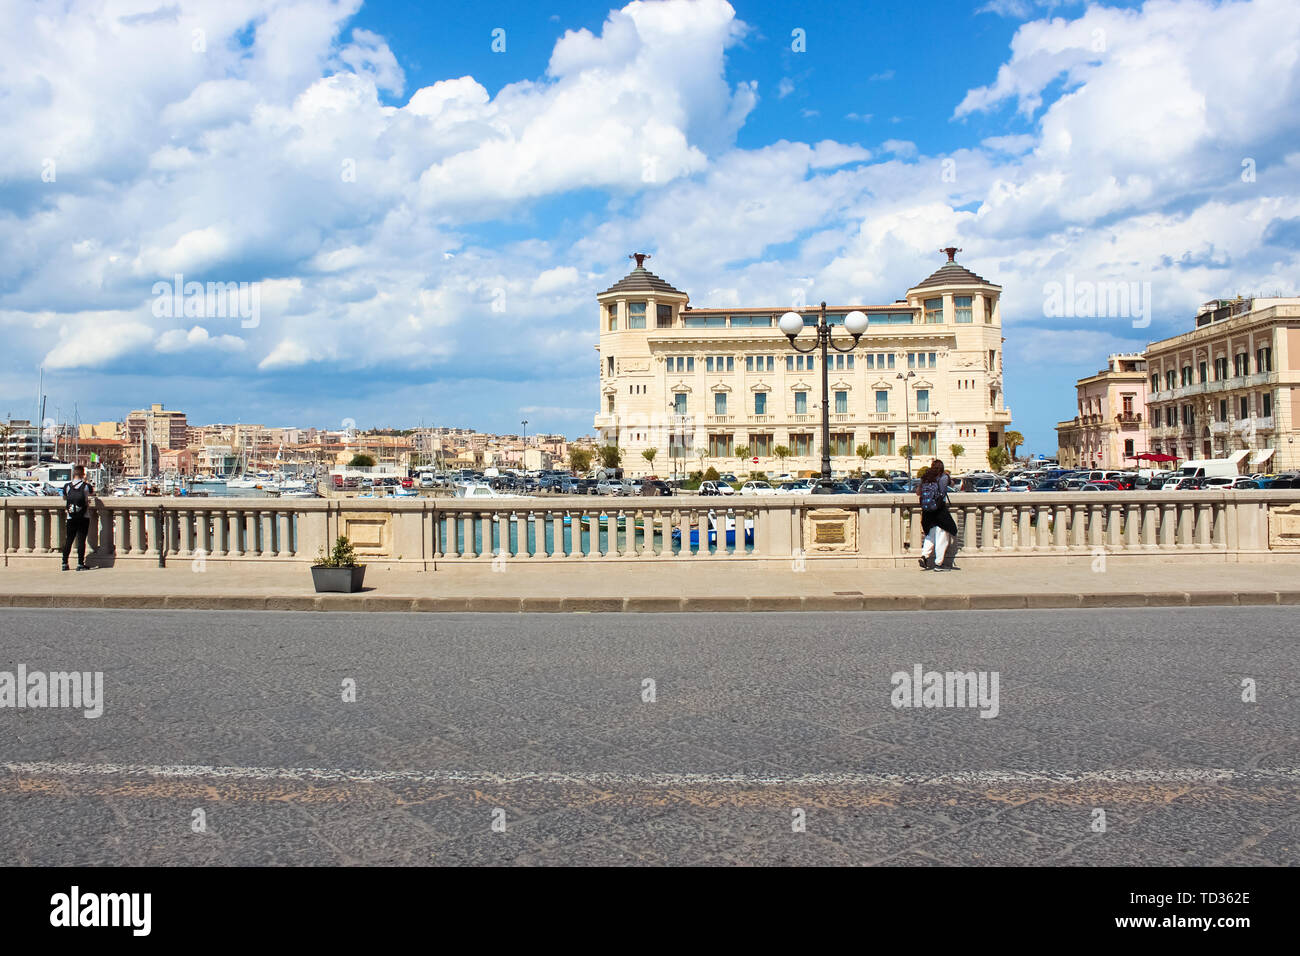 Syracuse, Sicily, Italy - Apr 10th 2019: Tourists standing on a bridge and taking pictures of a beautiful marina on a sunny day. The bridge is connecting Syracuse and famous Ortigia Island. Stock Photo